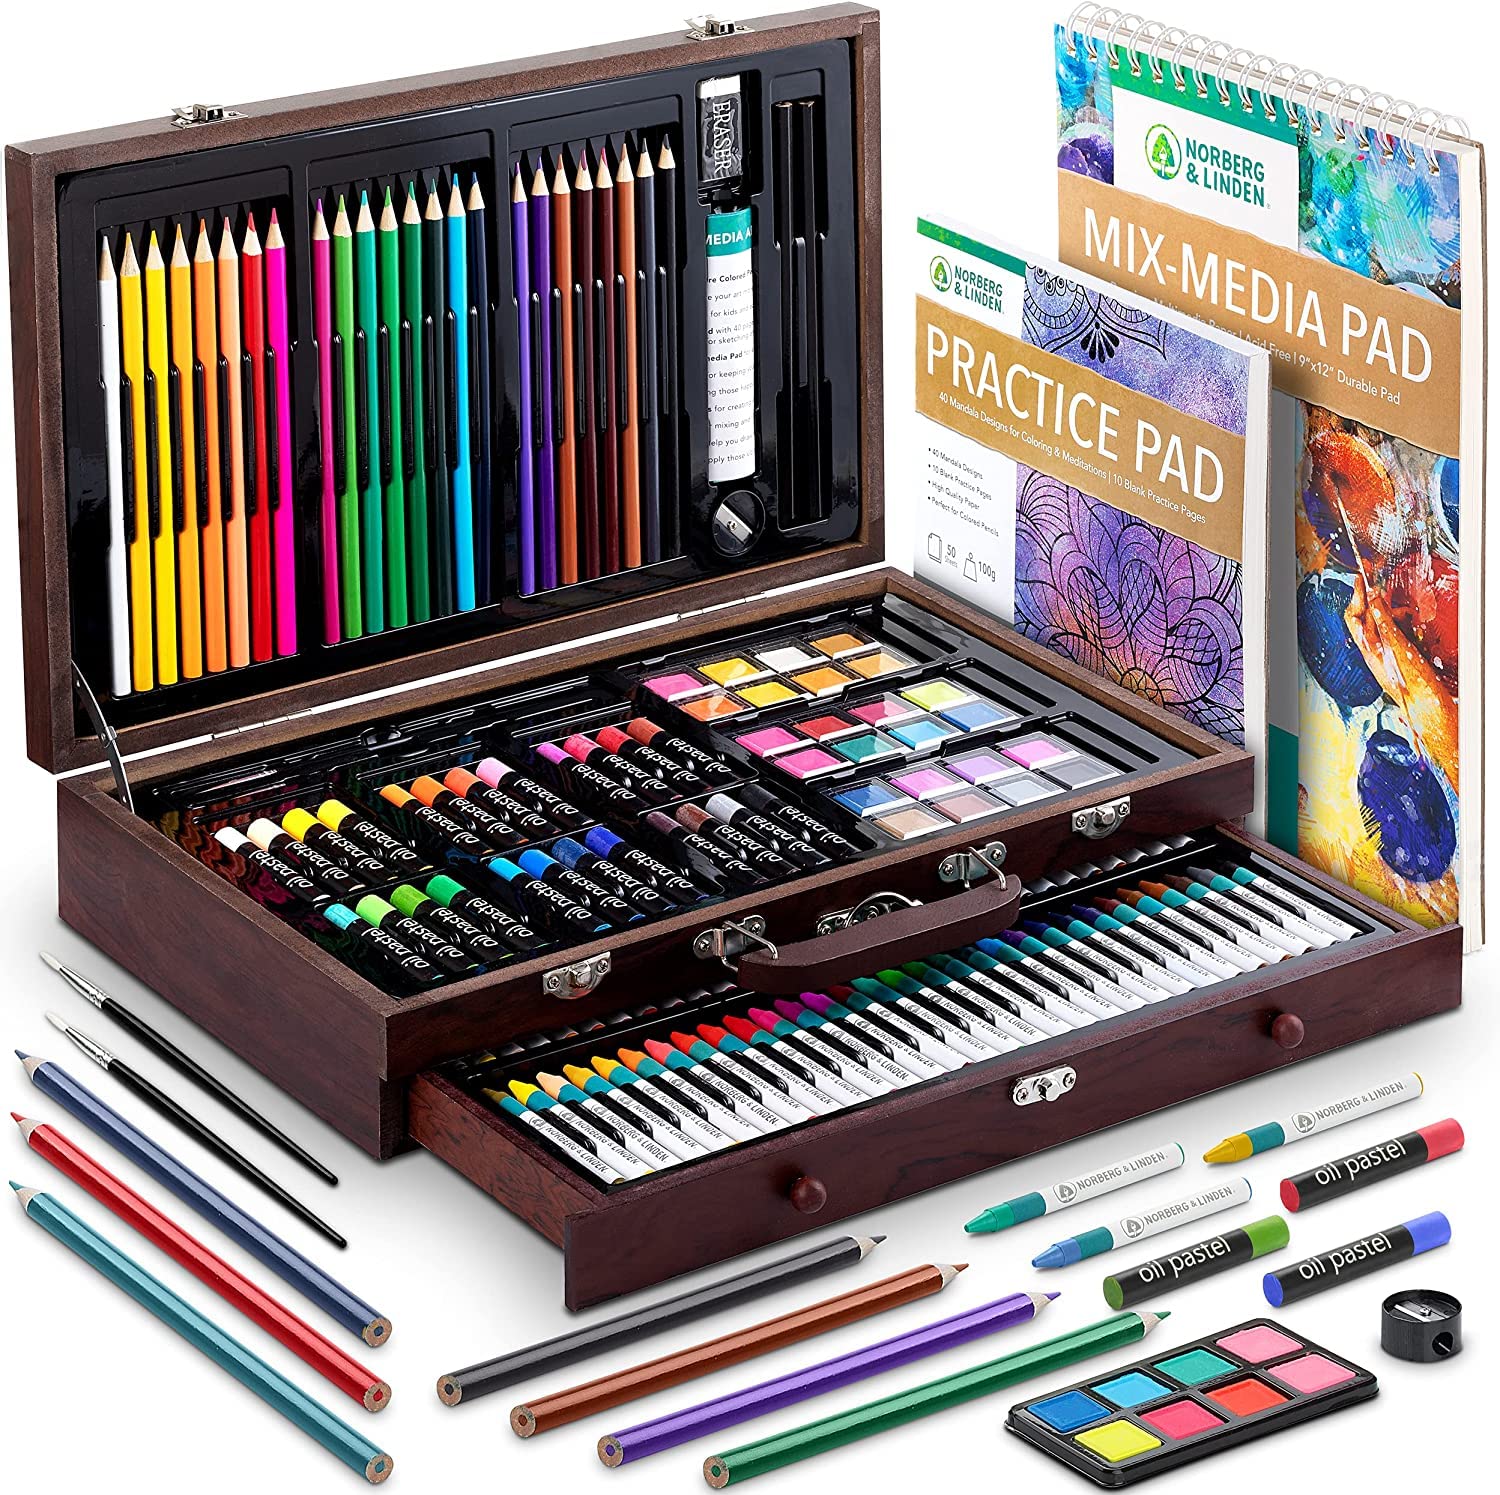 XL Drawing Set - Sketching, Graphite and Charcoal Pencils. Includes 100 Page Drawing Pad, Kneaded Eraser, Blending Stump. Art Kit and Supplies for